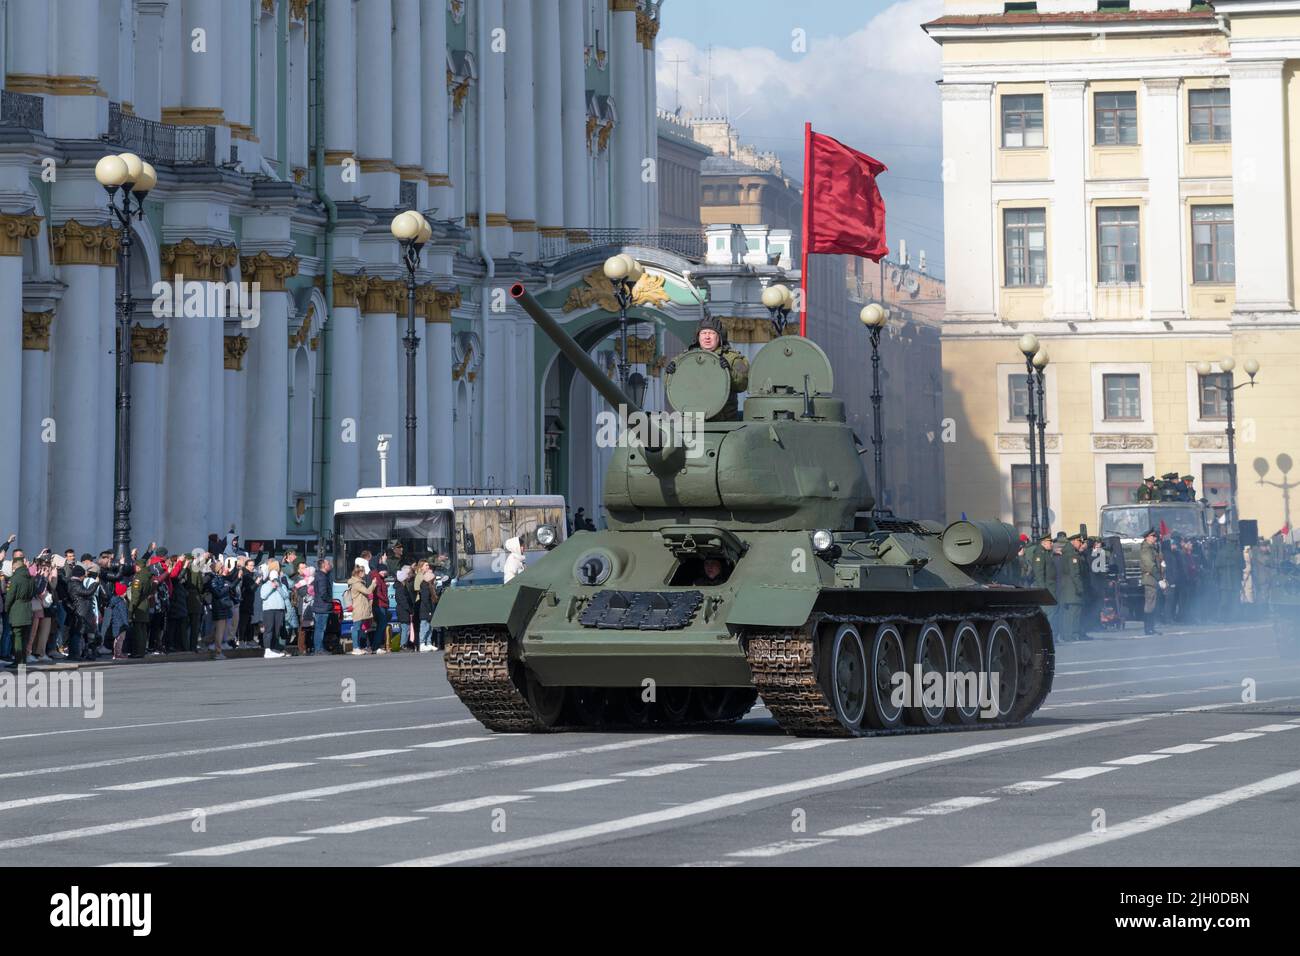 SAINT PETERSBURG, RUSSIA - APRIL 28, 2022: T-34 the most famous tank of the WWII period on the rehearsal of the Victory Day parade. Palace Square Stock Photo